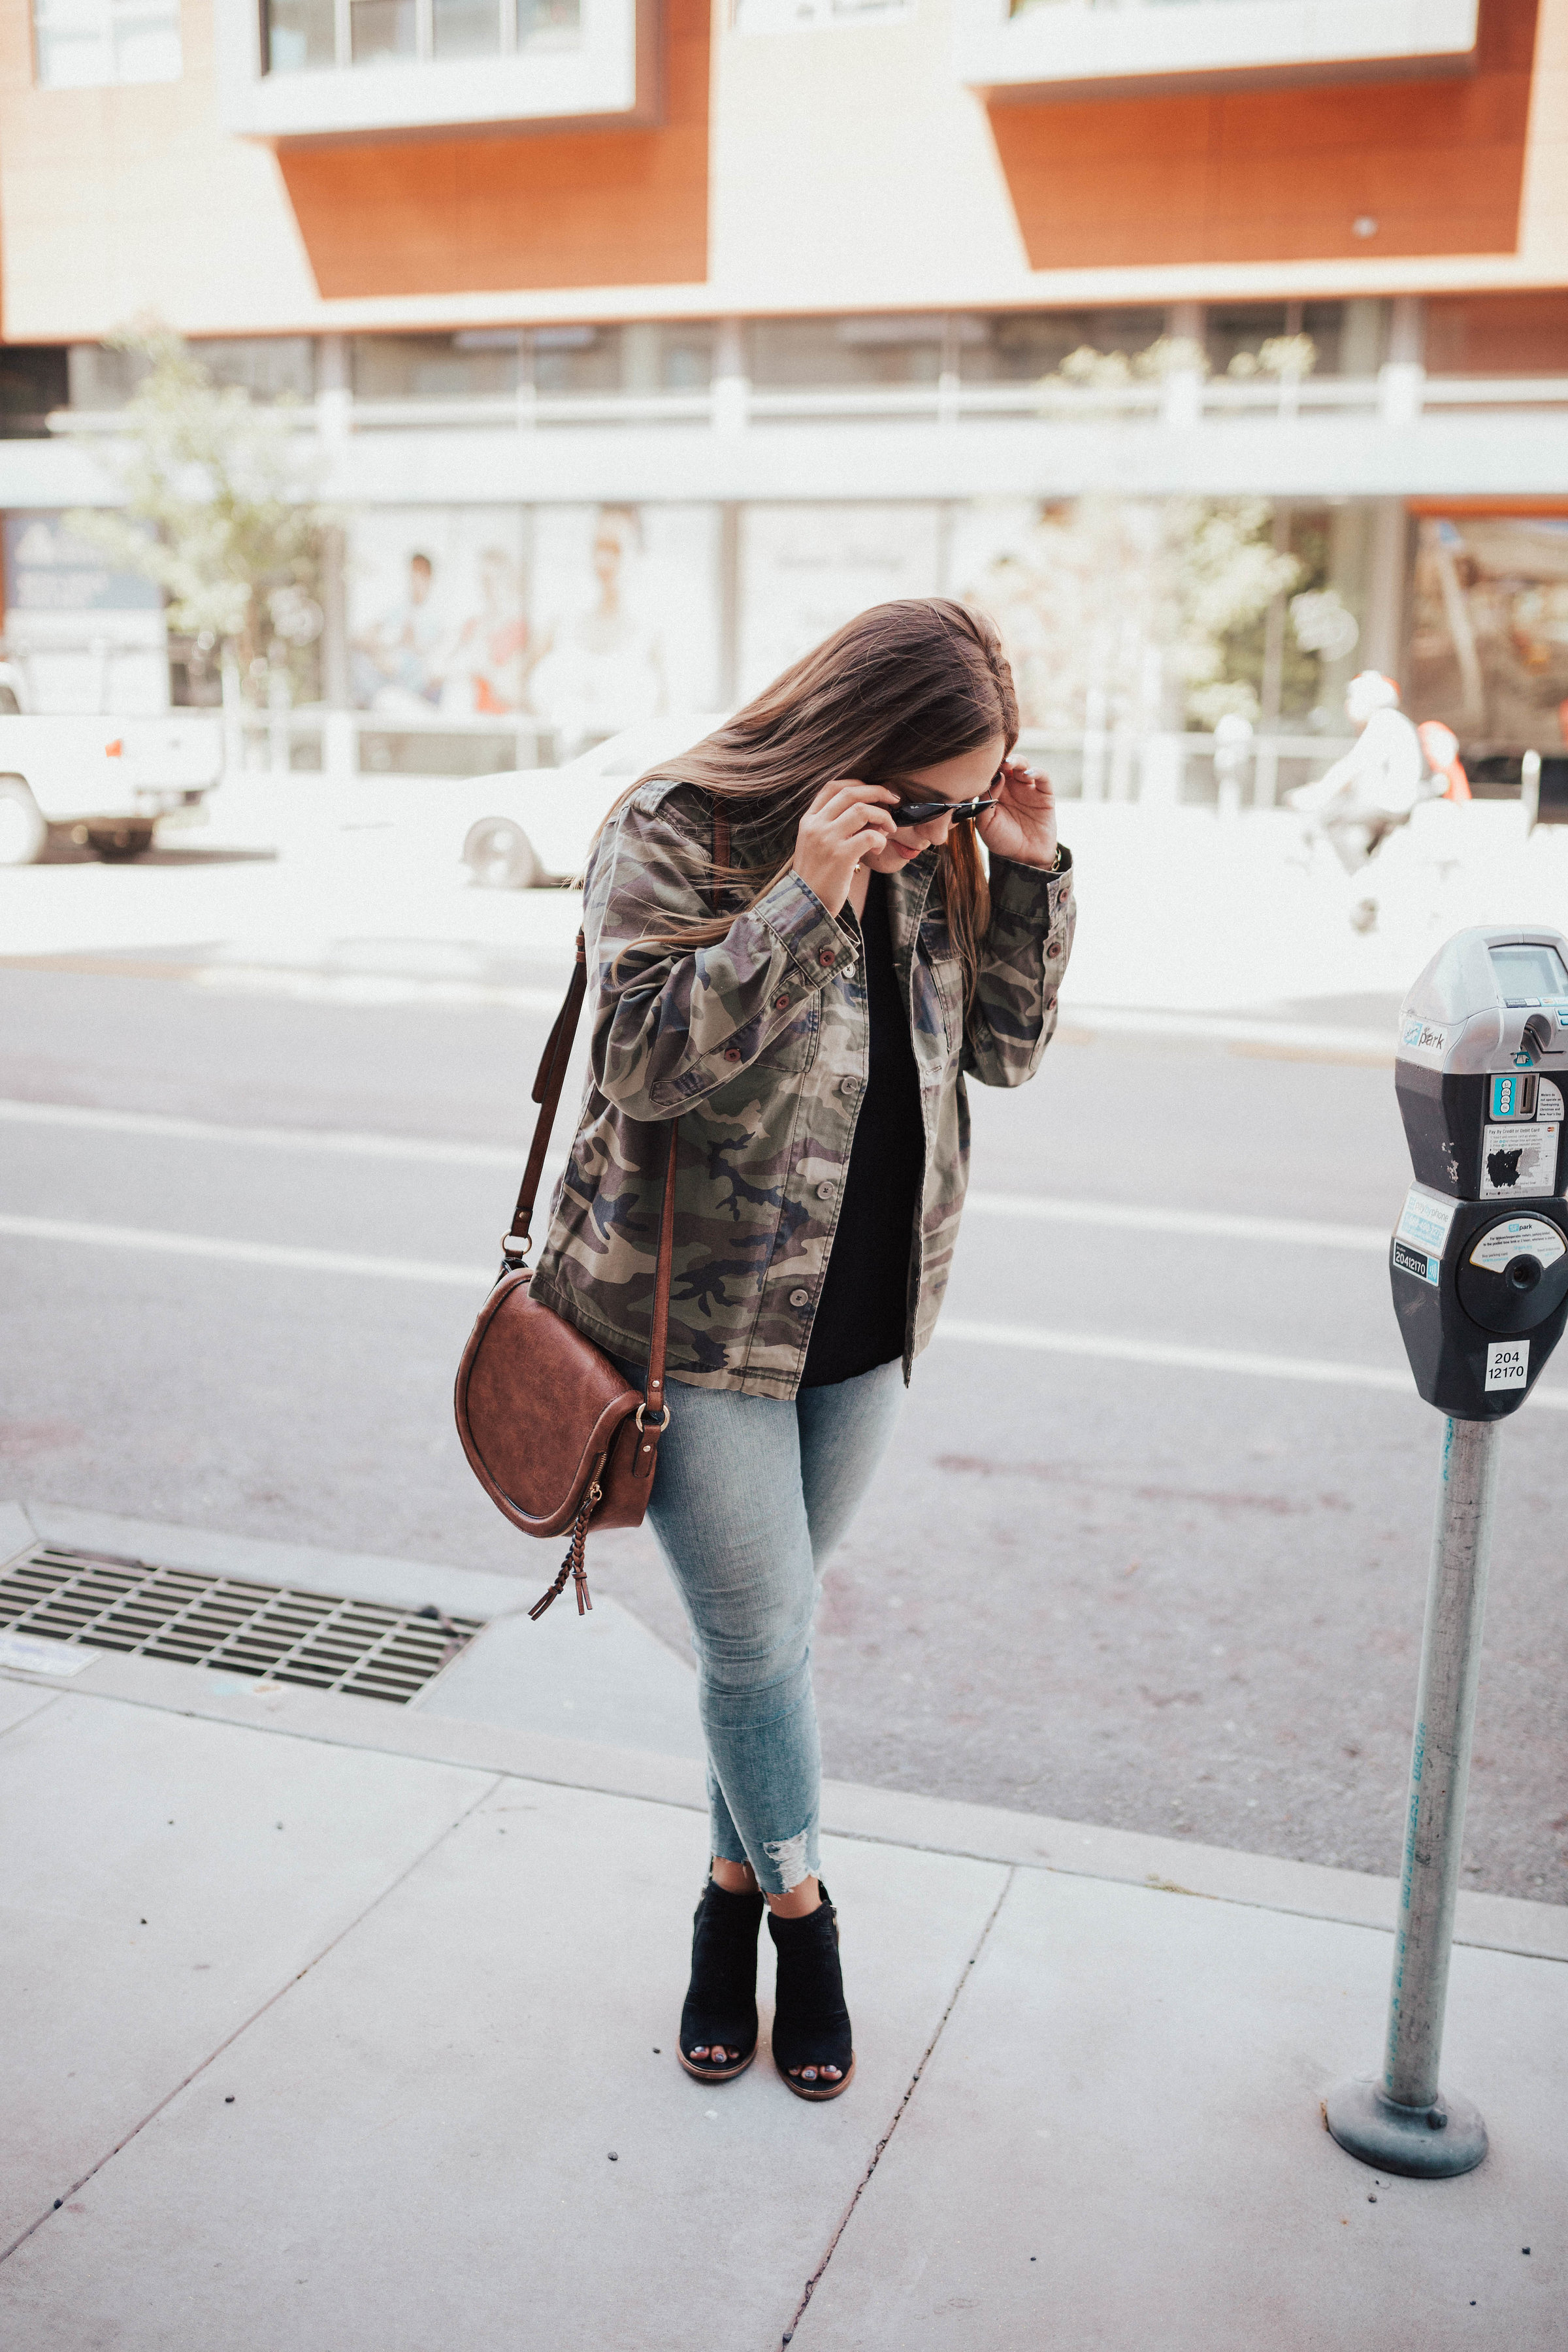 Ashley Zeal from Two Peas in a Prada shares her favorite camo jacket. She discusses why every girl needs one and also what she did last weekend. 